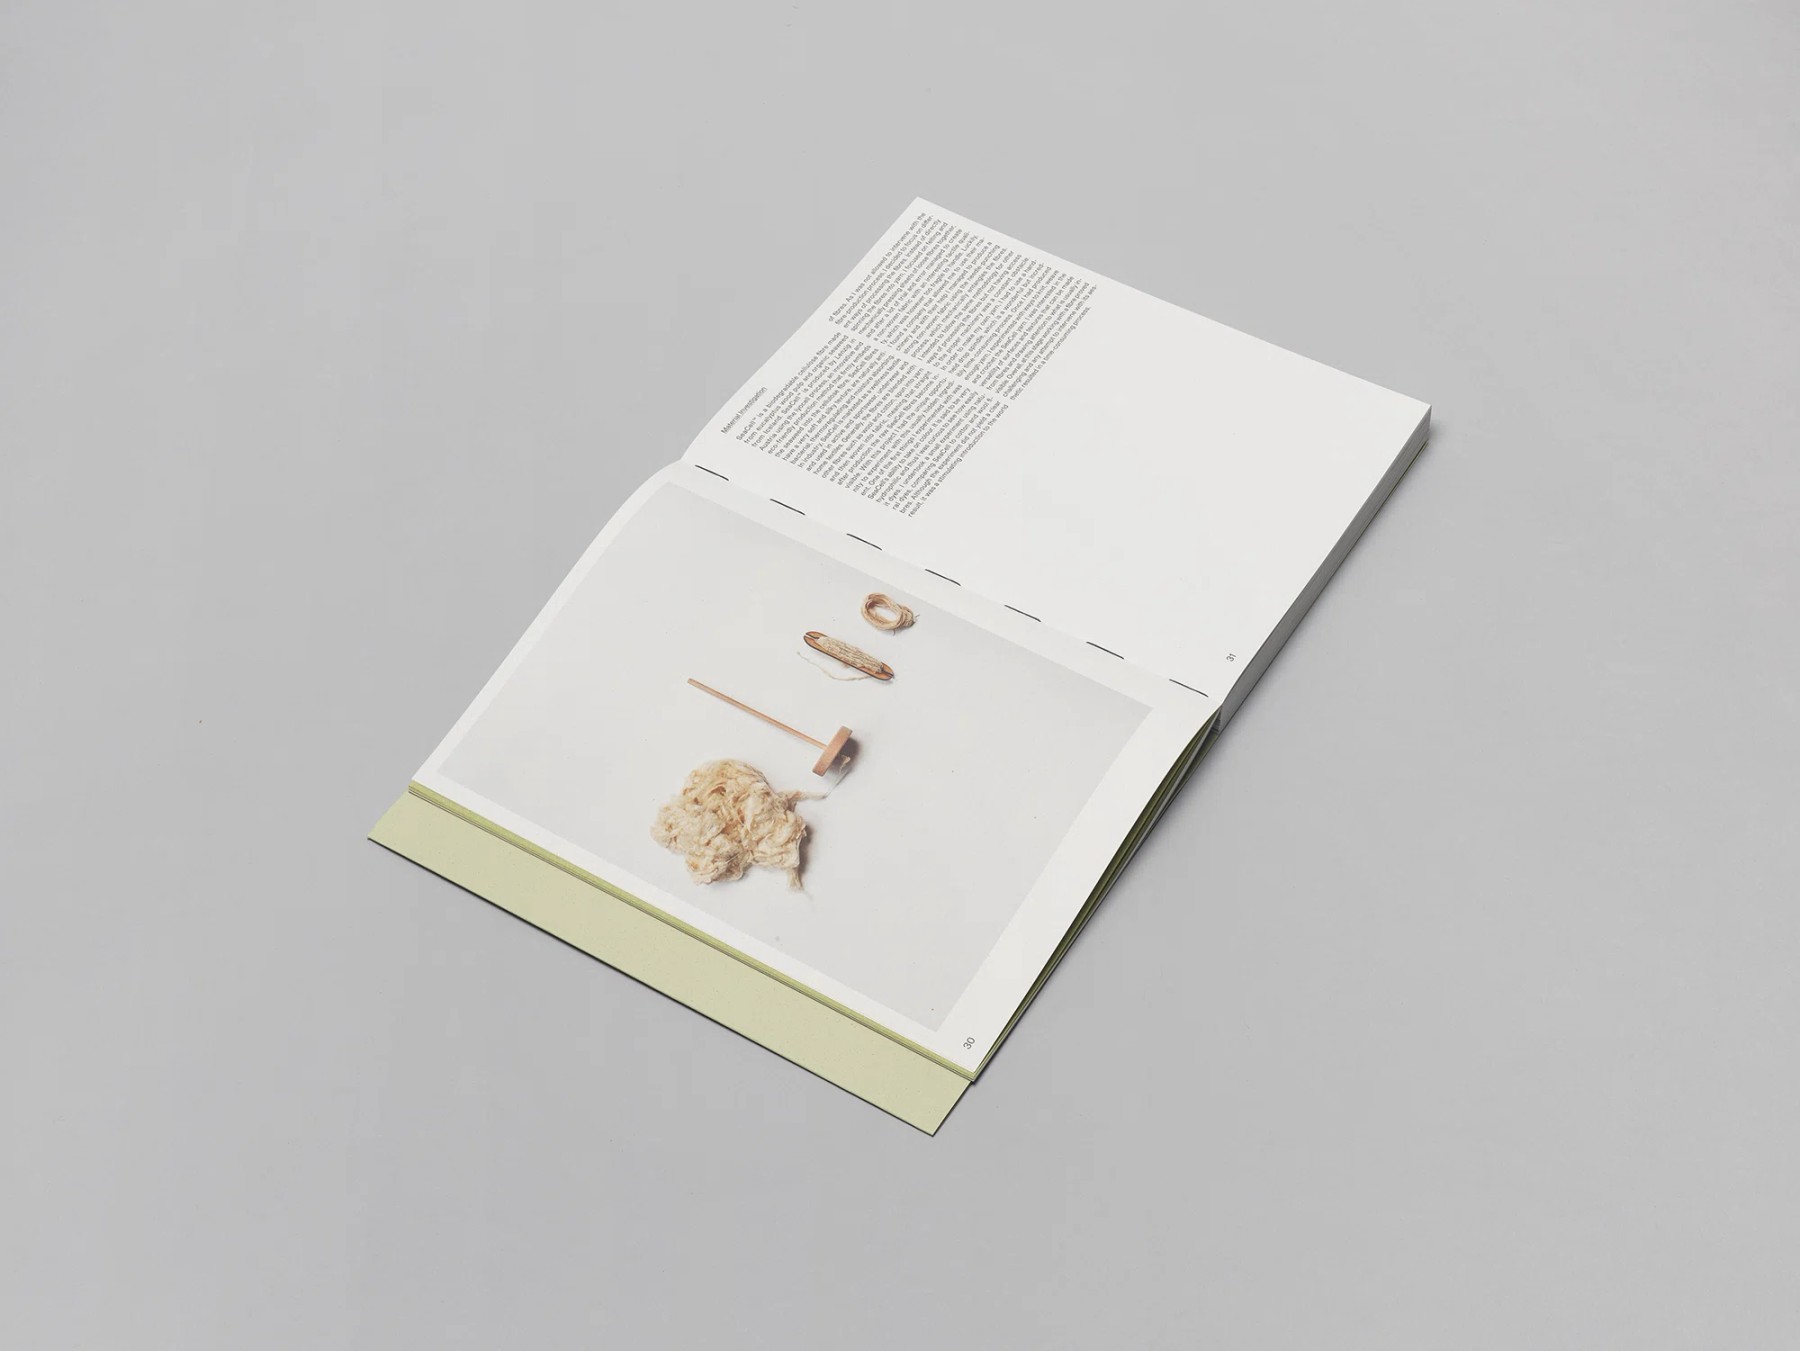 ecal-aesthetics-of-sustainability-work-graphic-design-itsnicethat-5.jpg